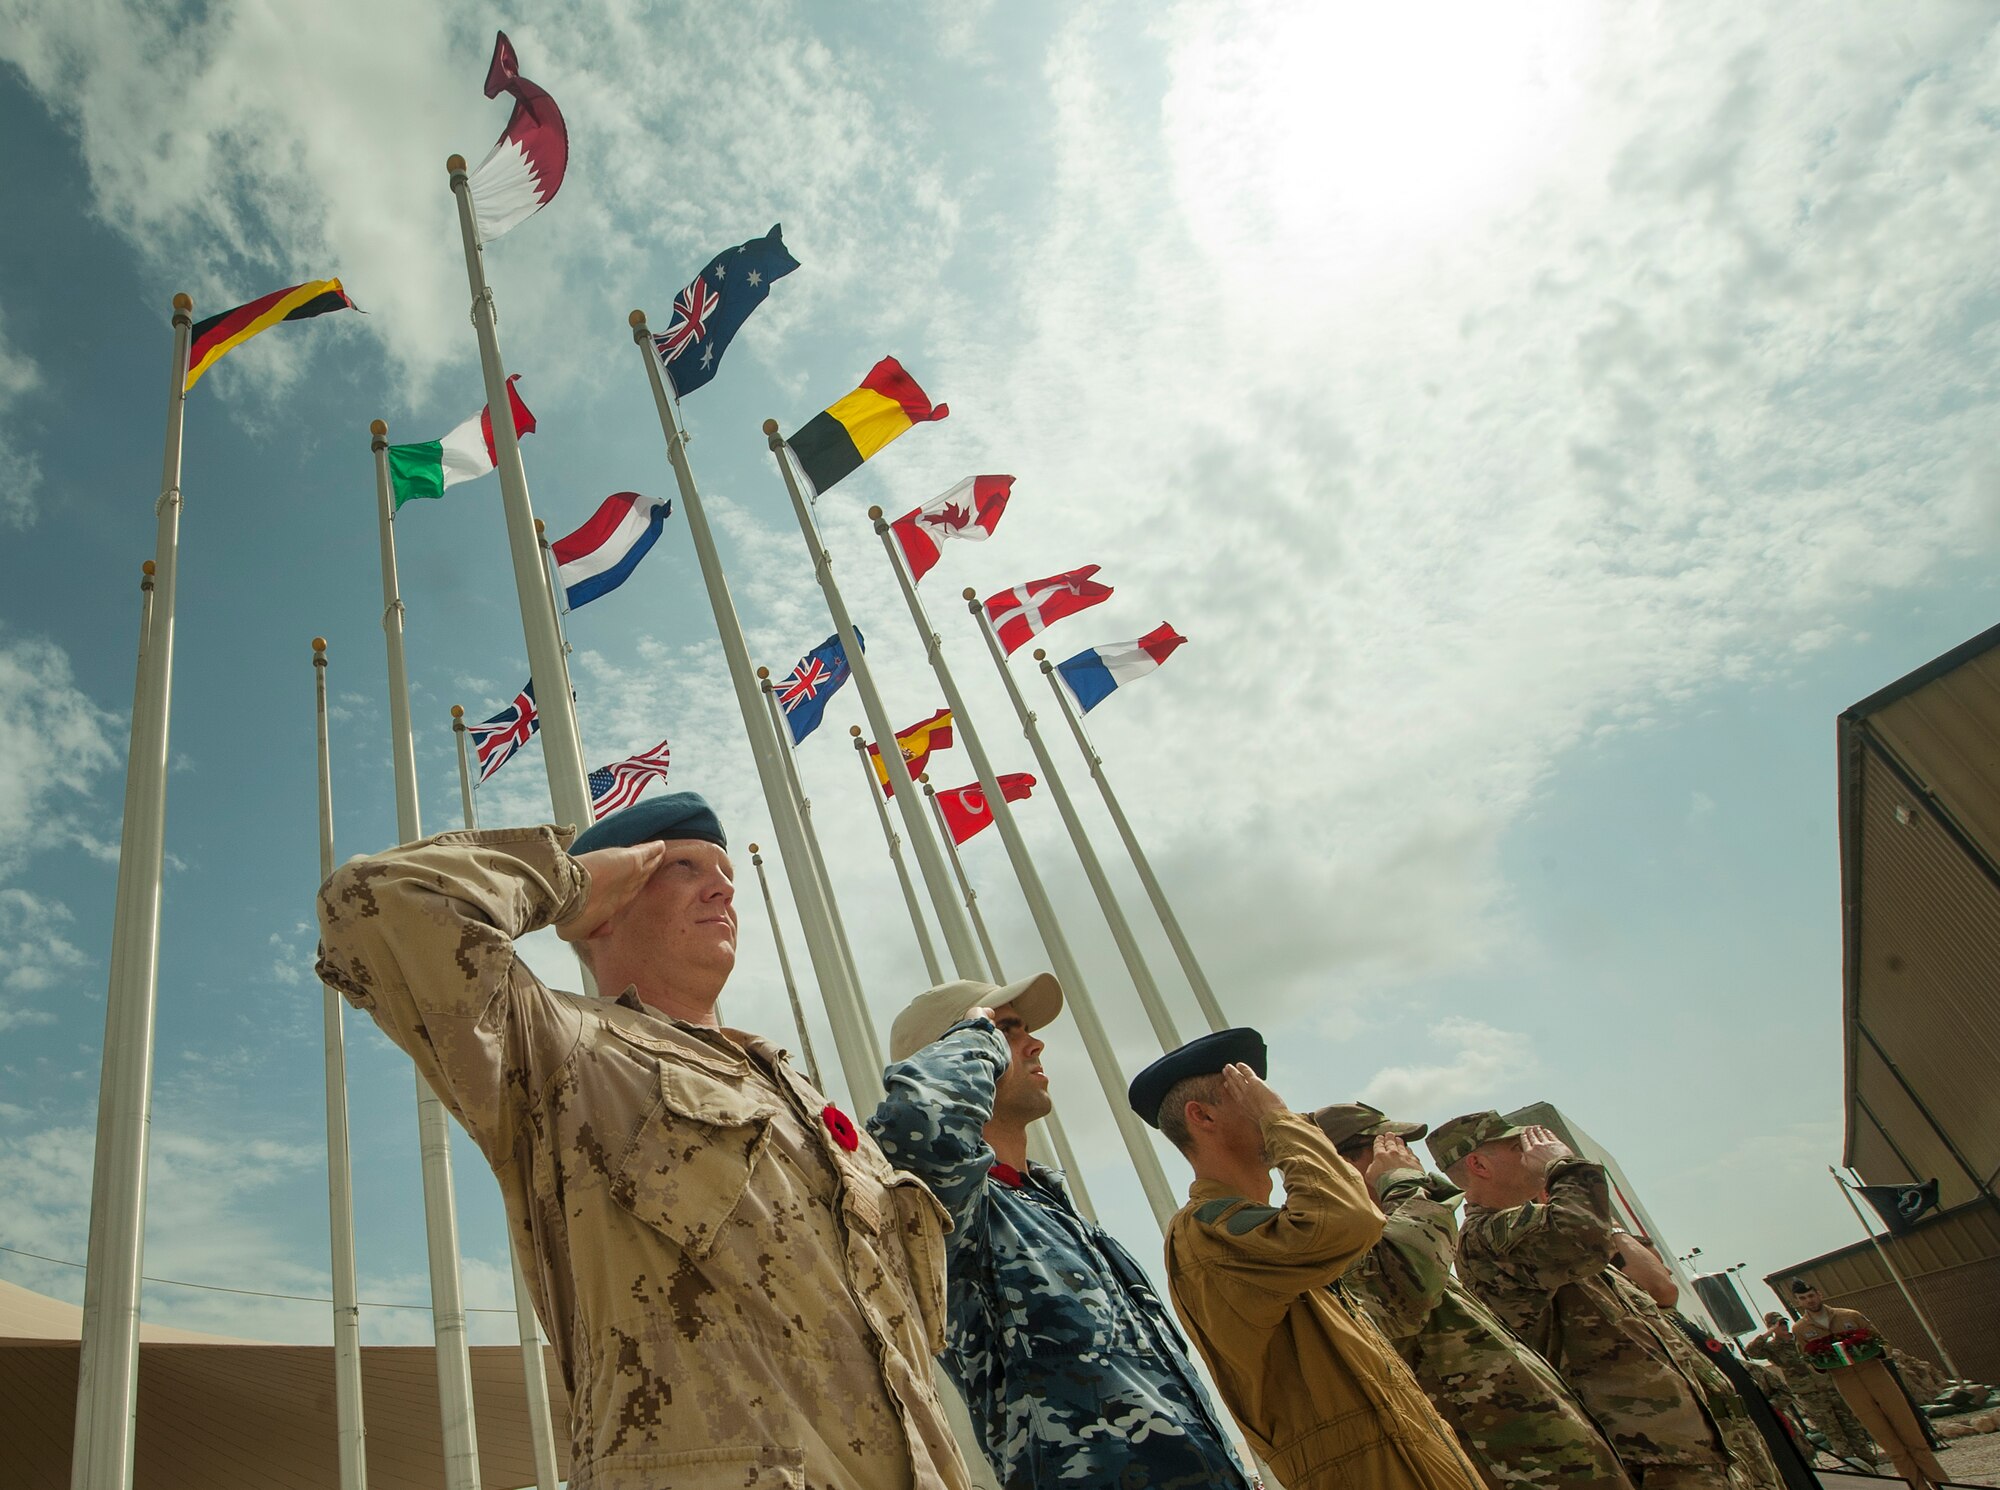 A group of multinational service members render a salute during a Service of Remembrance Nov. 11, 2018, at Al Udeid Air Base, Qatar. Members of the Royal Air Force hosted the event, organizing the involvement of 15 nations’ military members. The service marked 100 years since the end of World War I. (U.S. Air Force photo by Tech. Sgt. Christopher Hubenthal)